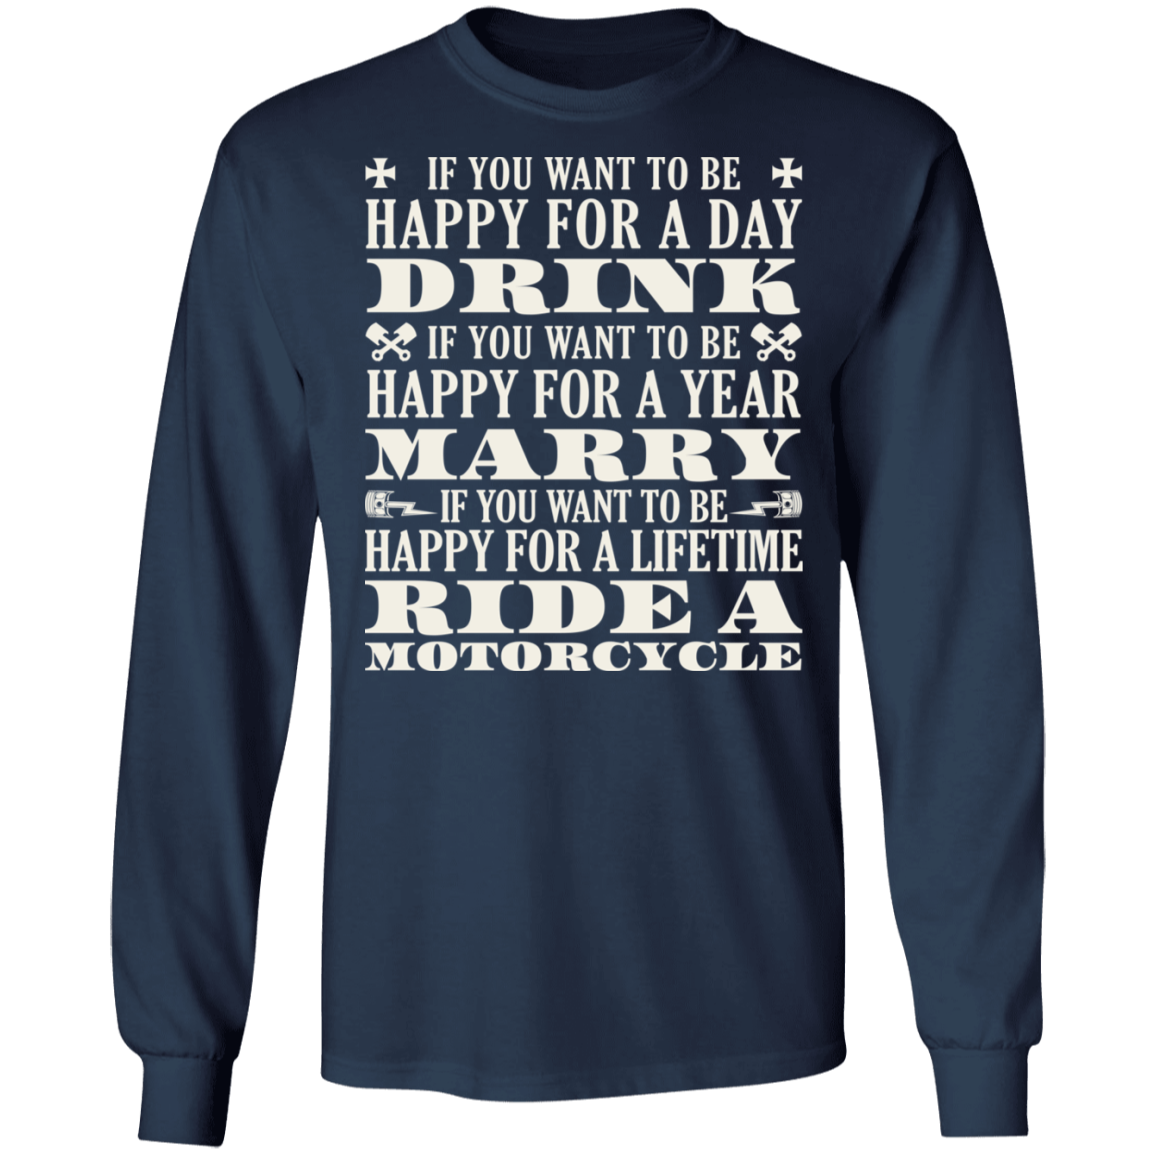 If you want to be happy for a day, drink Shirt